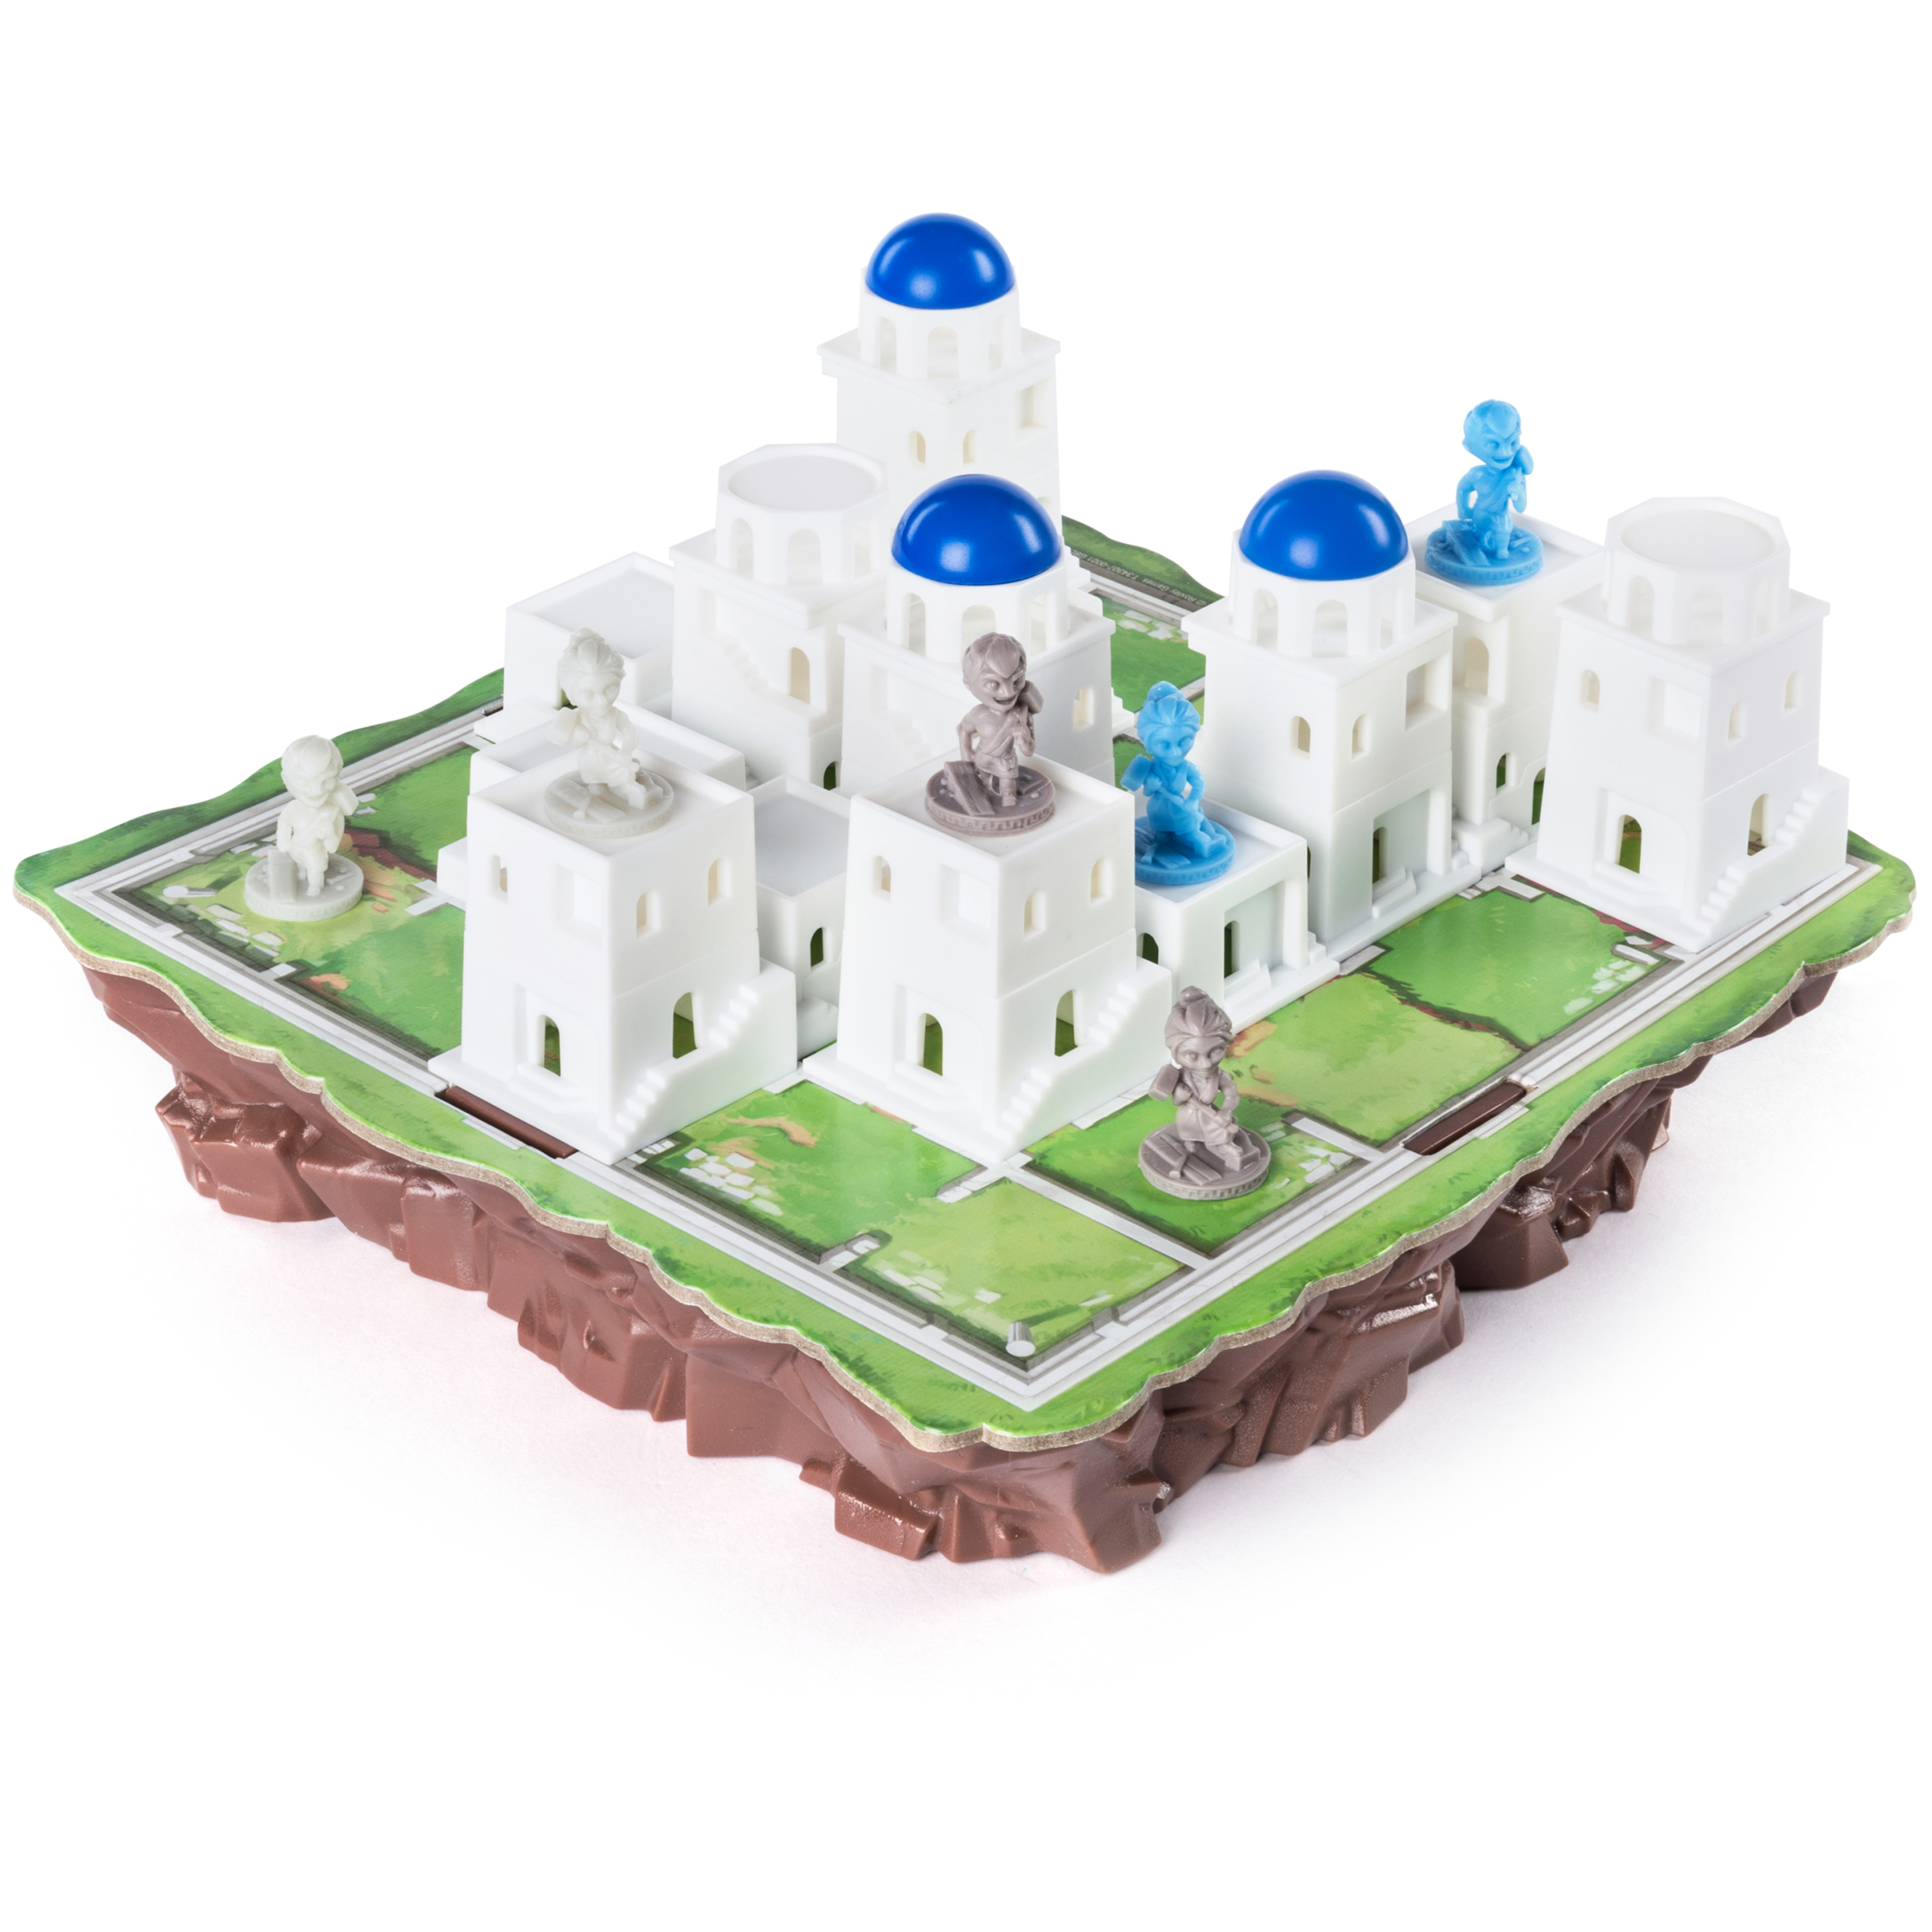 Santorini, Strategy Family Board Game 2-4 Players Classic Fun Building Greek Mythology Card Game, for Kids & Adults Ages 8 and up - image 2 of 6